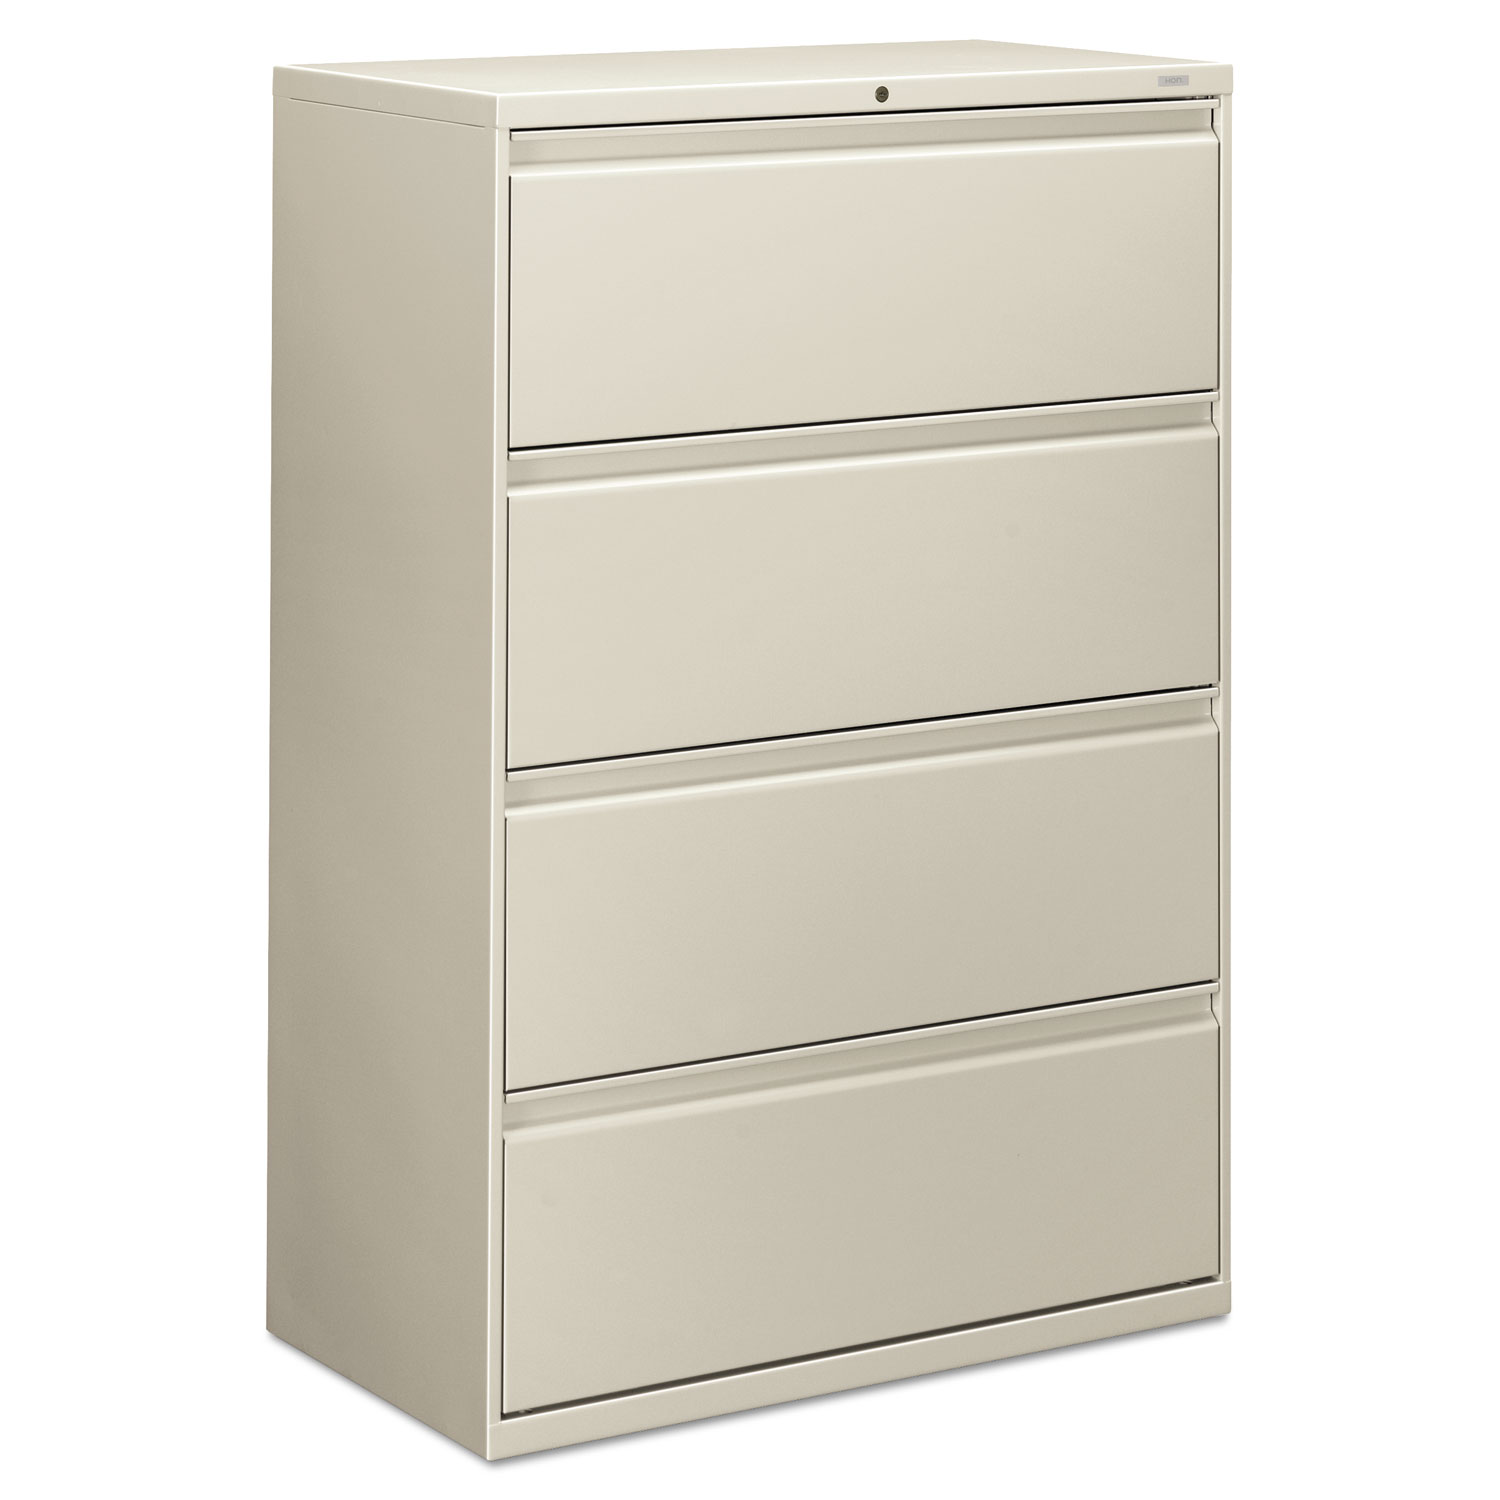 800 Series Four-Drawer Lateral File, 36w x 19-1/4d x 53-1/4h, Light Gray